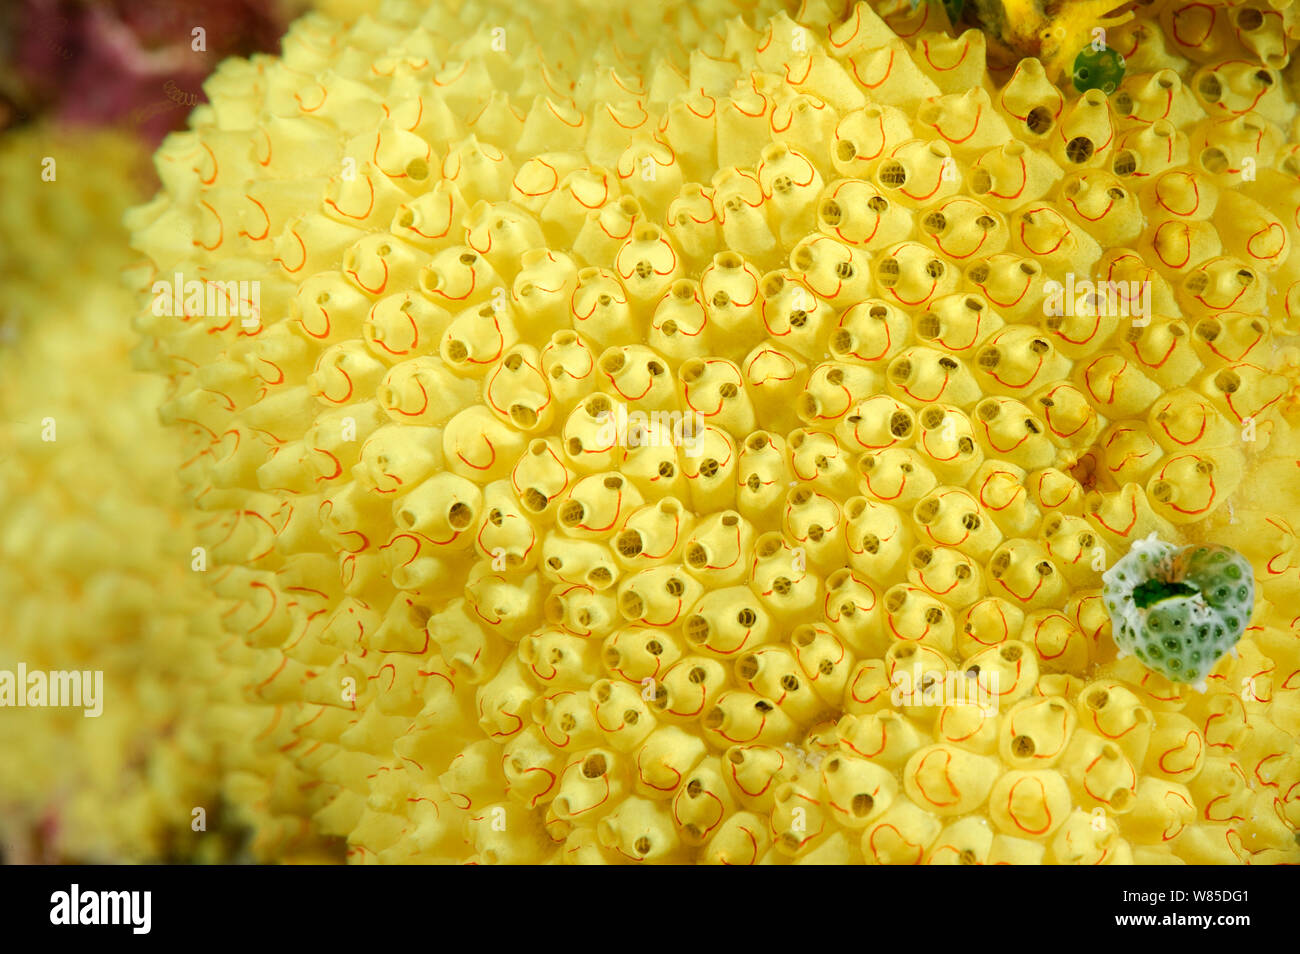 Smiley looking cluster of Sea tunicates (Perophora sp) Raja Ampat, West Papua, Indonesia, Pacific Ocean. Stock Photo